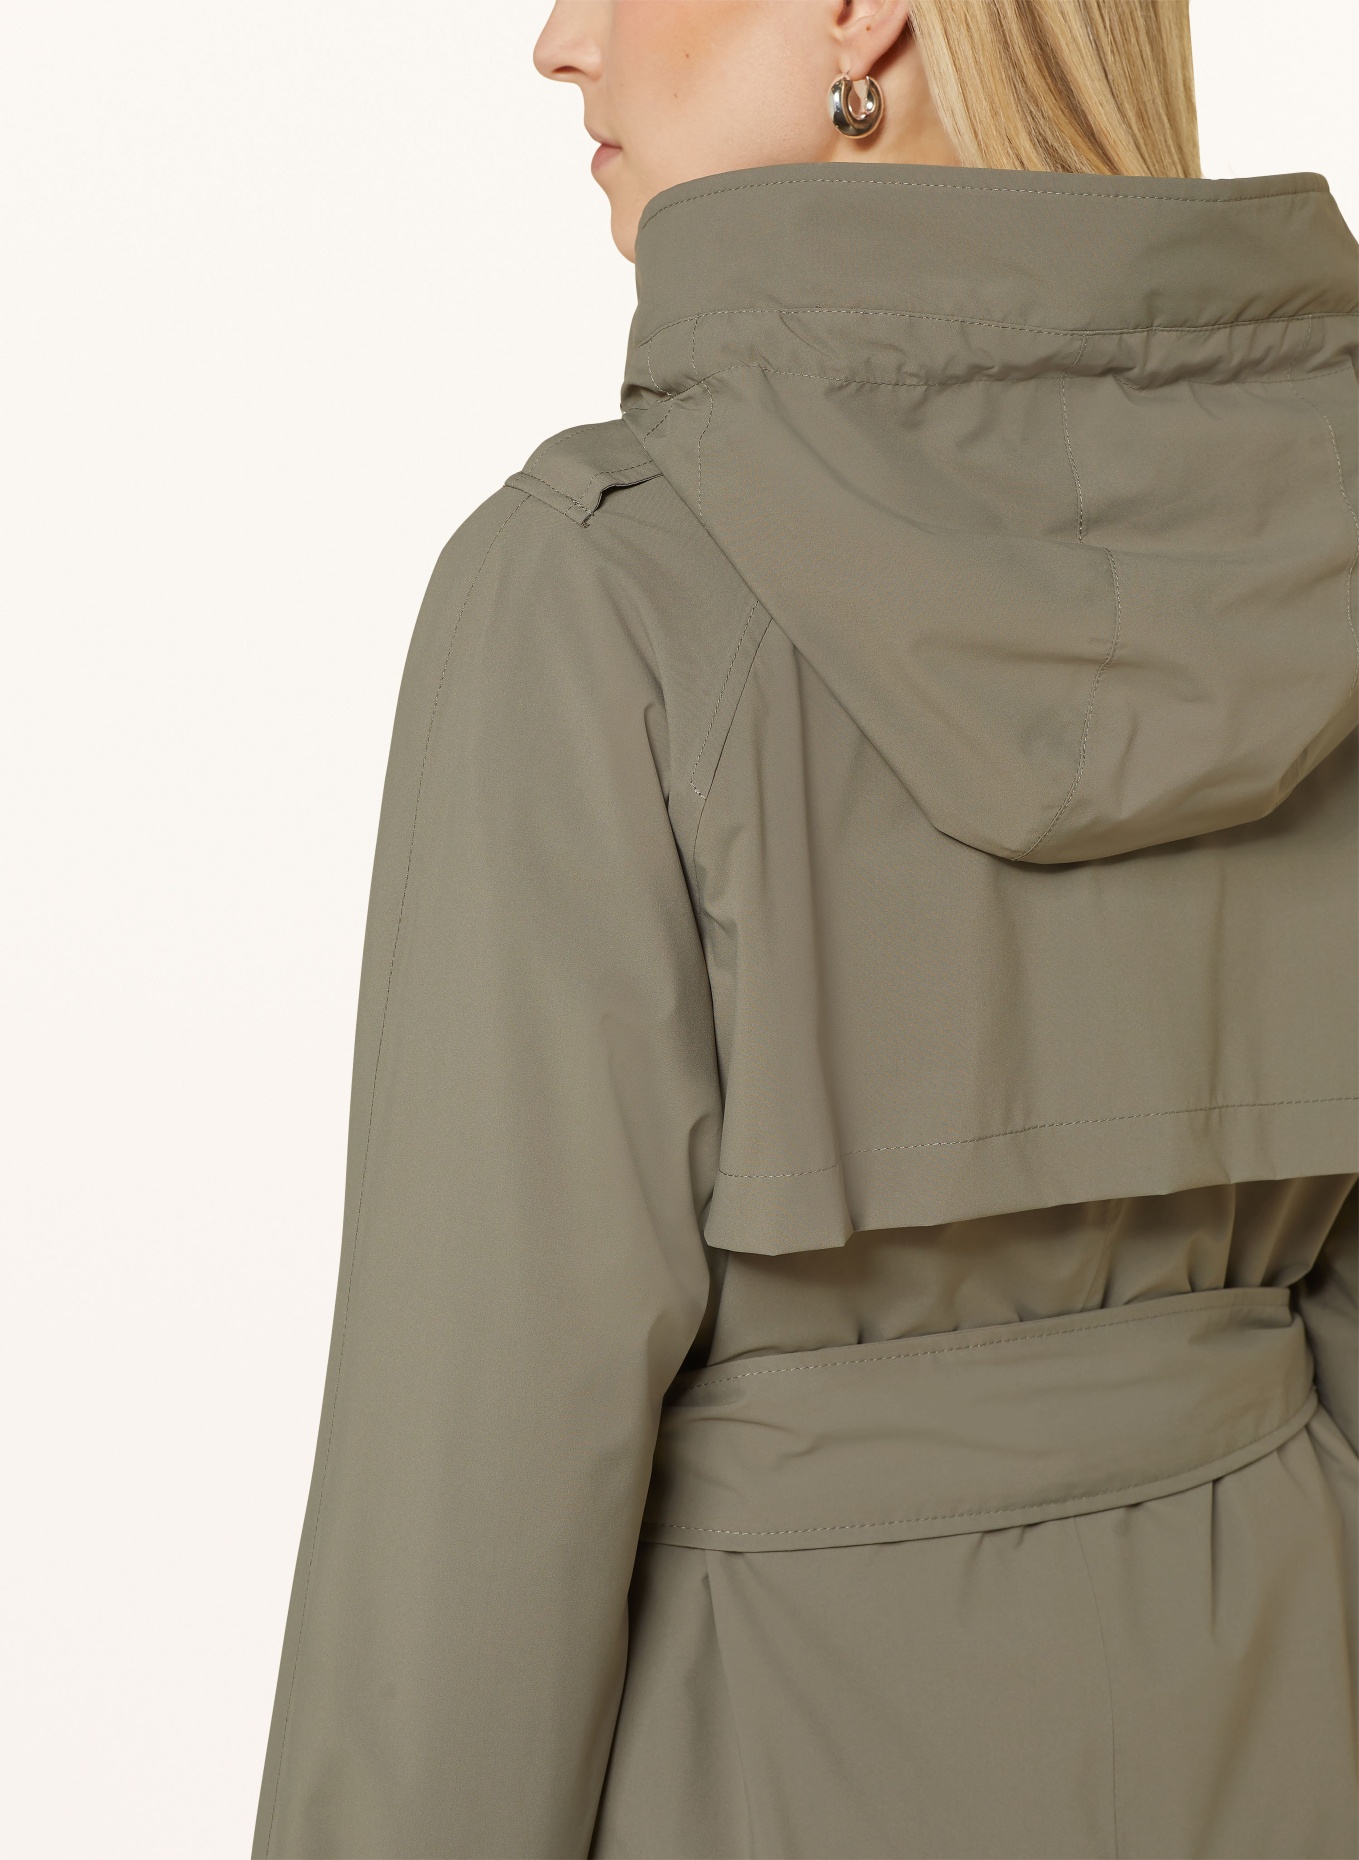 BEAUMONT Trench coat BRINKLEY with detachable hood, Color: KHAKI (Image 5)